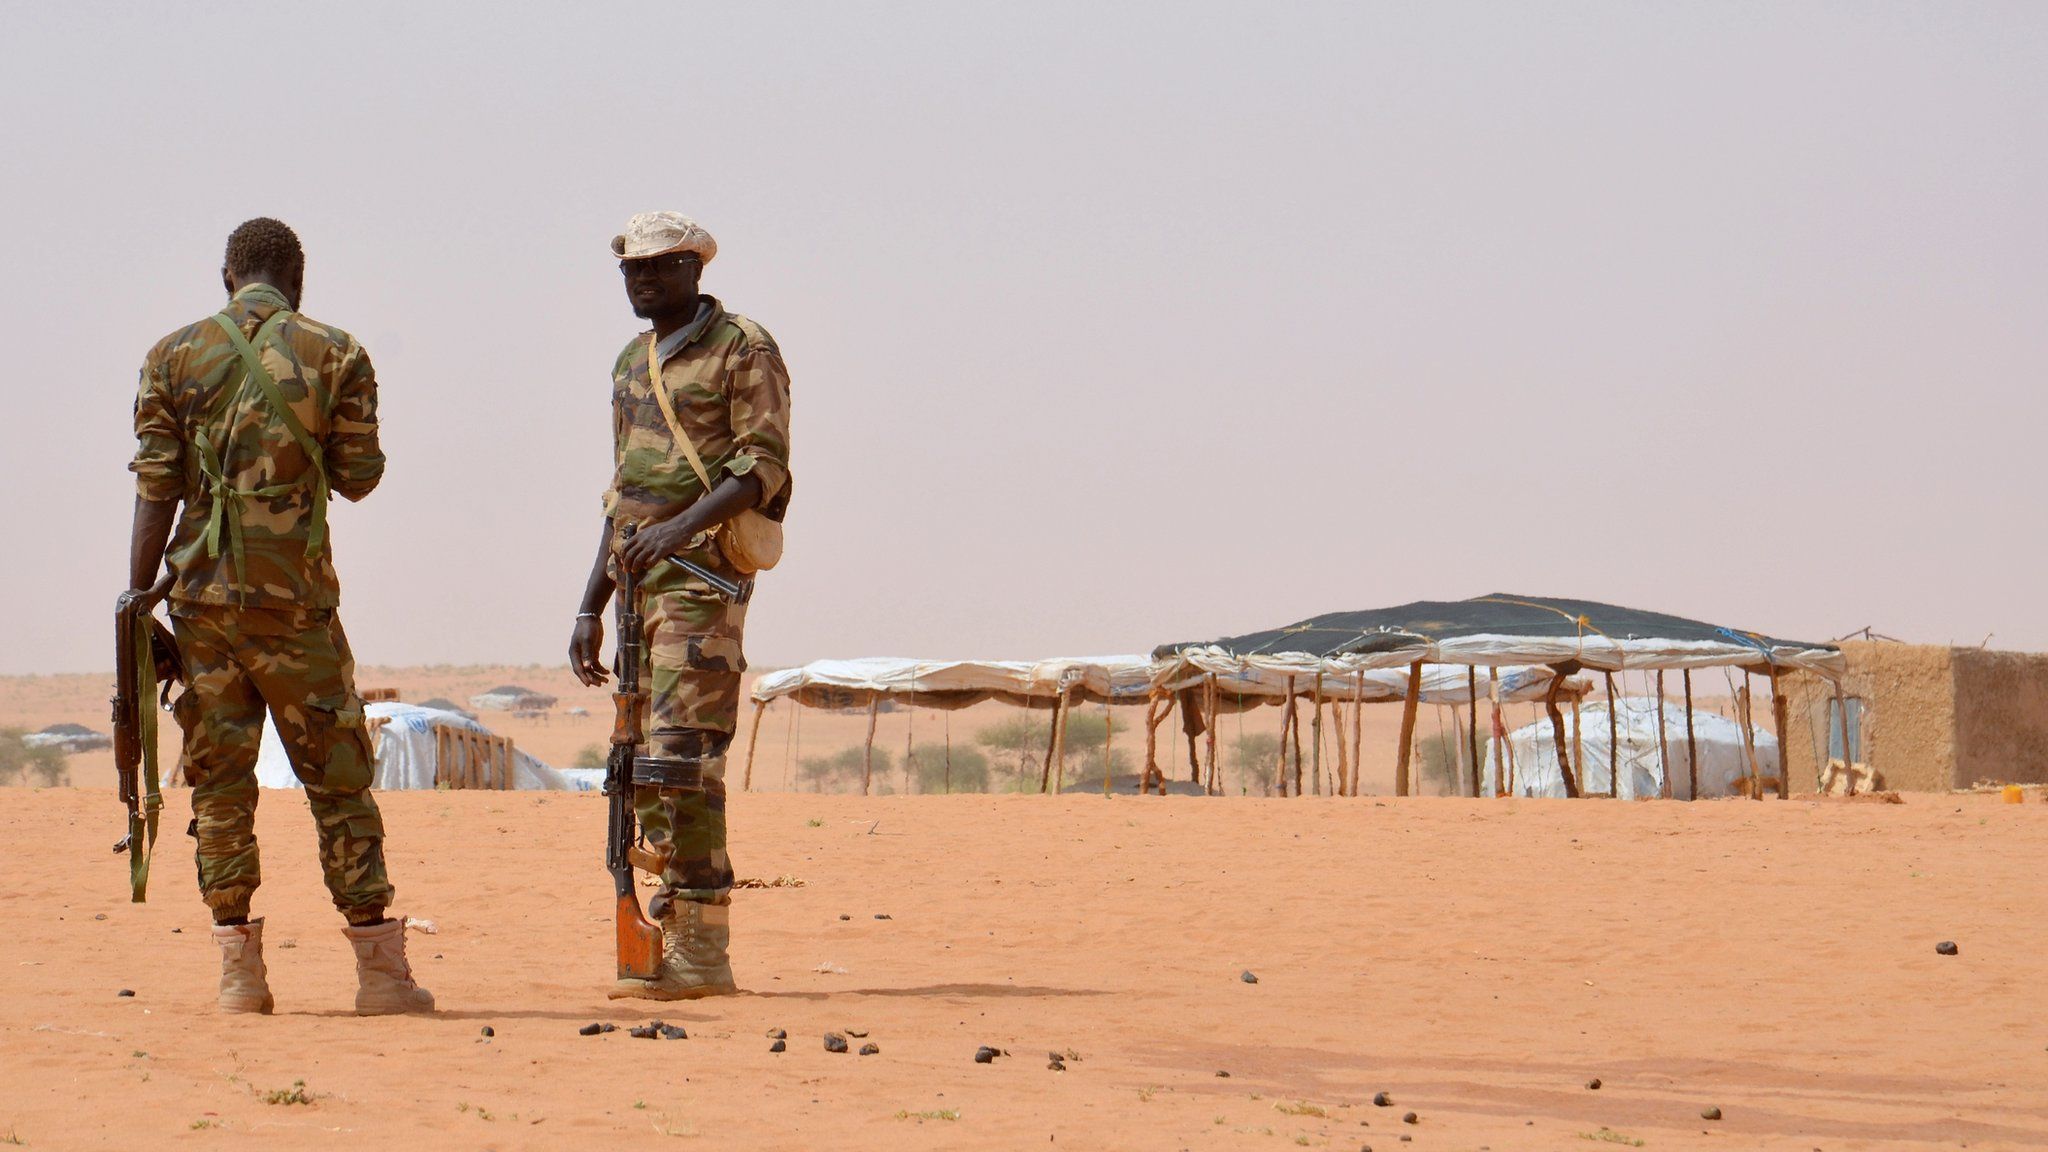 Niger soldiers stand guard during a visit by the Interior Minister Mohamed Bazoum on October 21, 2016 to the in Tazalit United Nations refugee camp in the Tahoua region some 300 kilometres northeast of the capital Niamey, where 22 soldiers were killed on October 7 by Islamic militants.